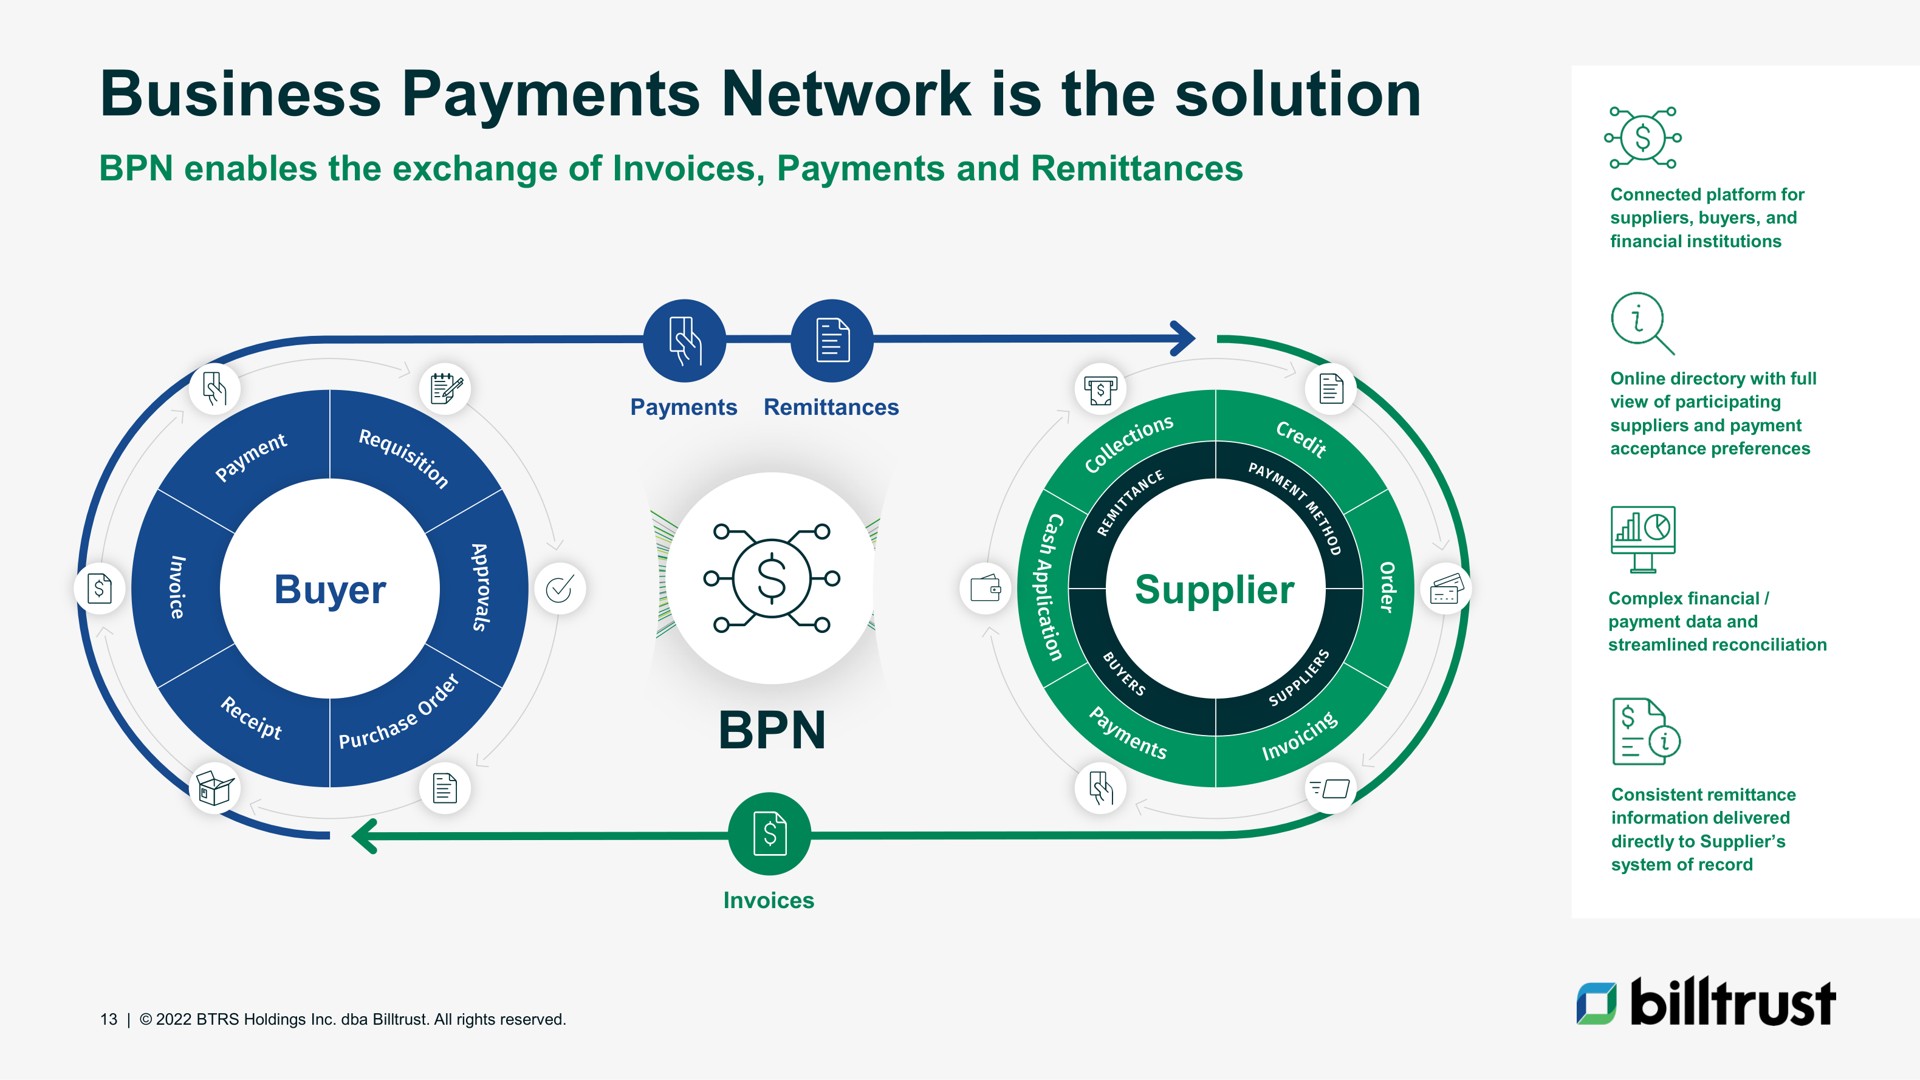 business payments network is the solution i | Billtrust